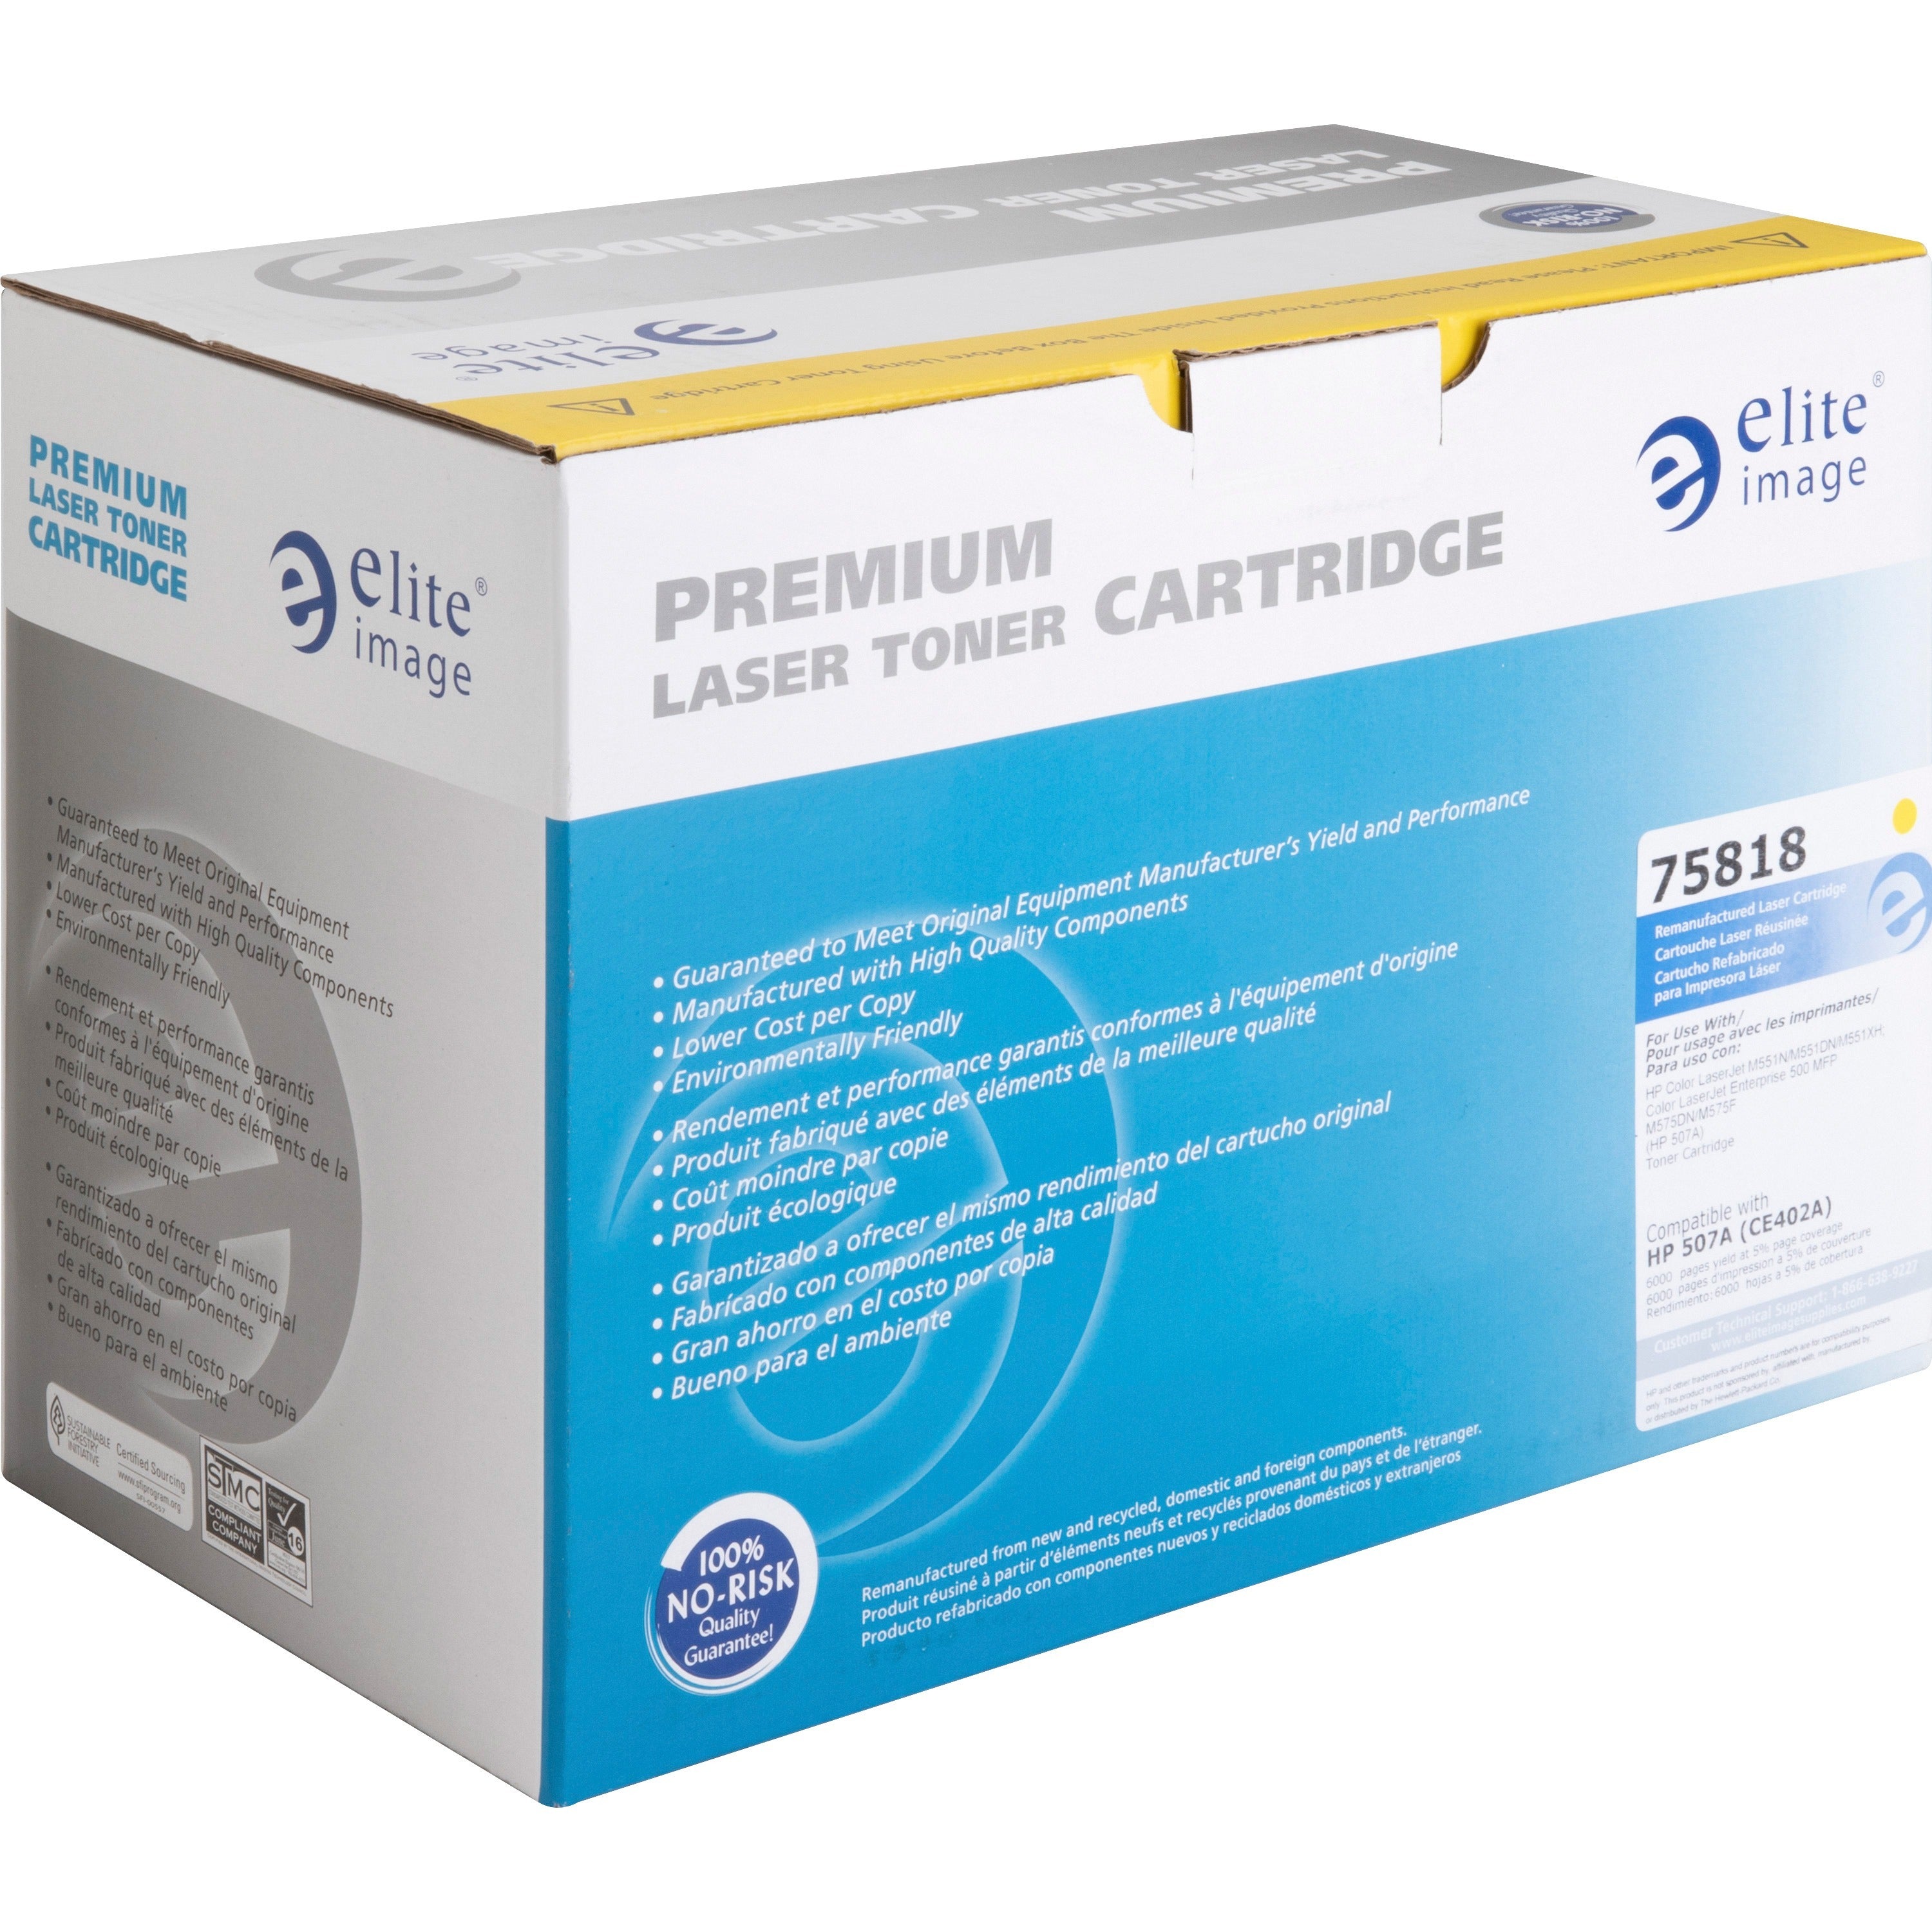 Elite Image Remanufactured Laser Toner Cartridge - Alternative for HP 507A (CE402A) - Yellow - 1 Each - 6000 Pages - 5